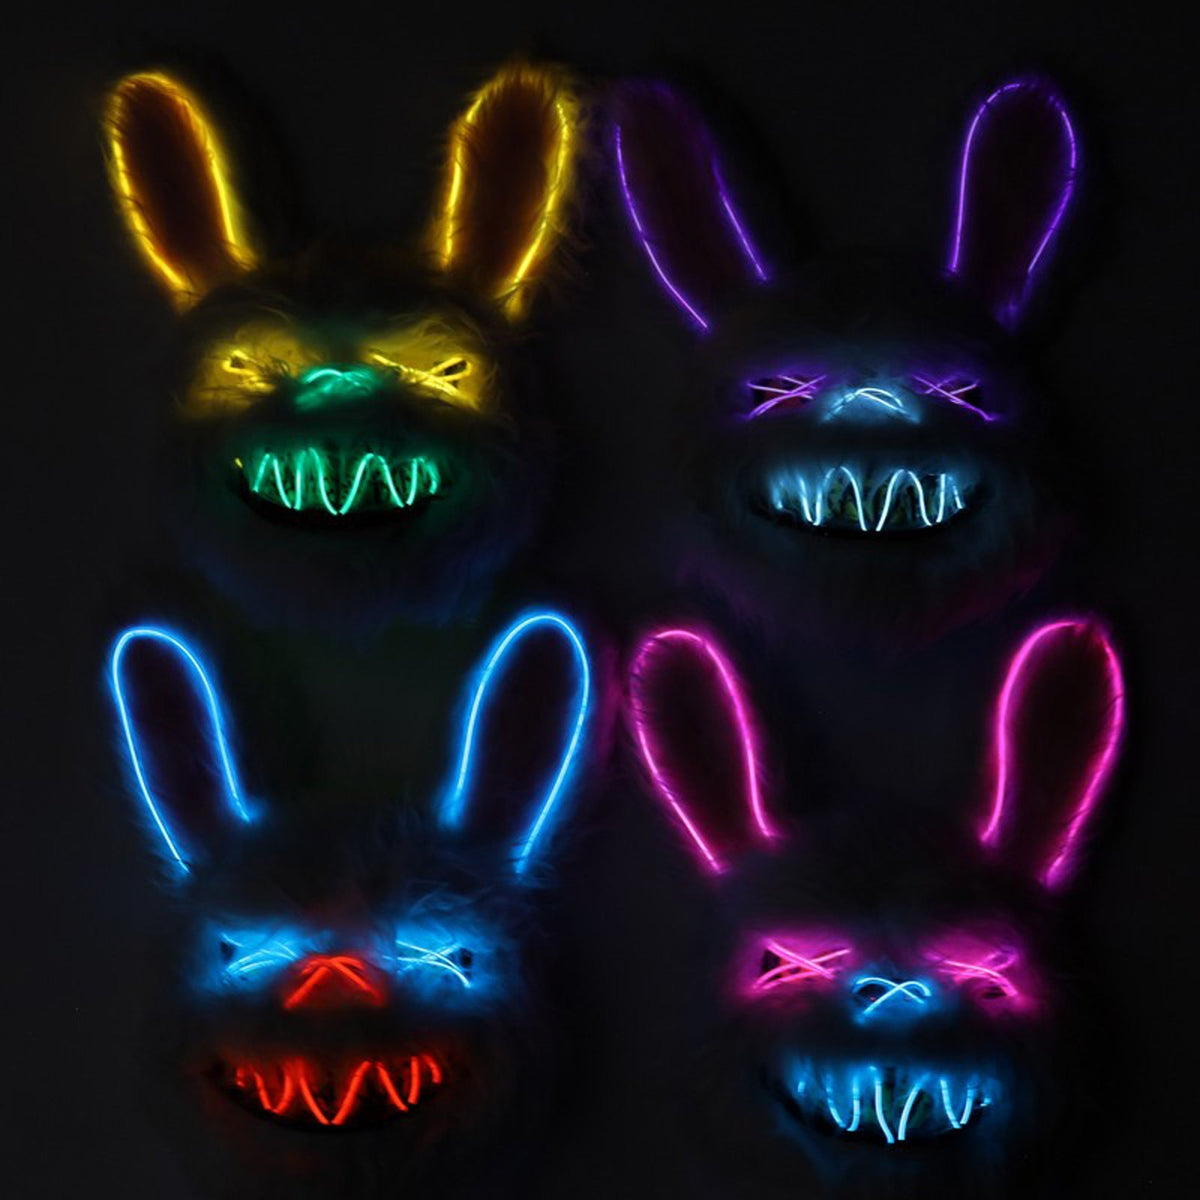 KBW GLOBAL CORP Costume Accessories LED Bunny Mask for adults, Assortement, 1 Count 831687041341